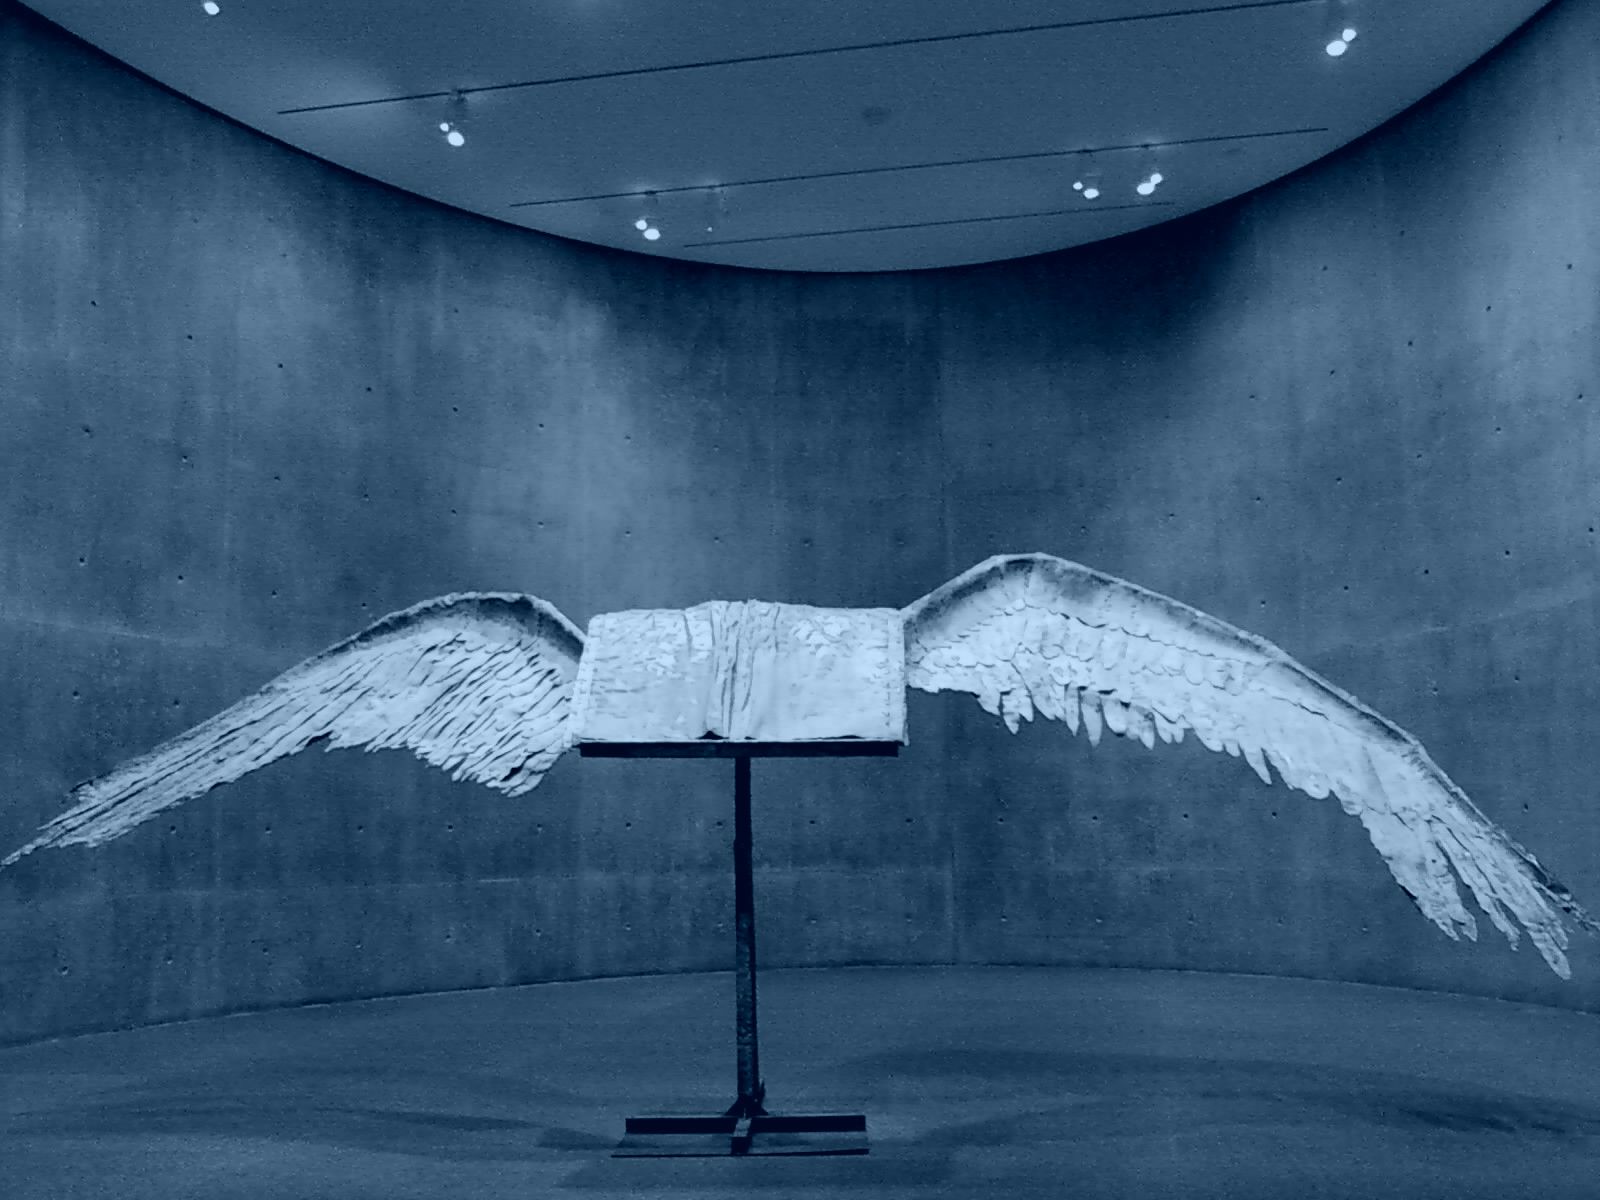 Book with Wings, 1992-94, Anselm Kiefer